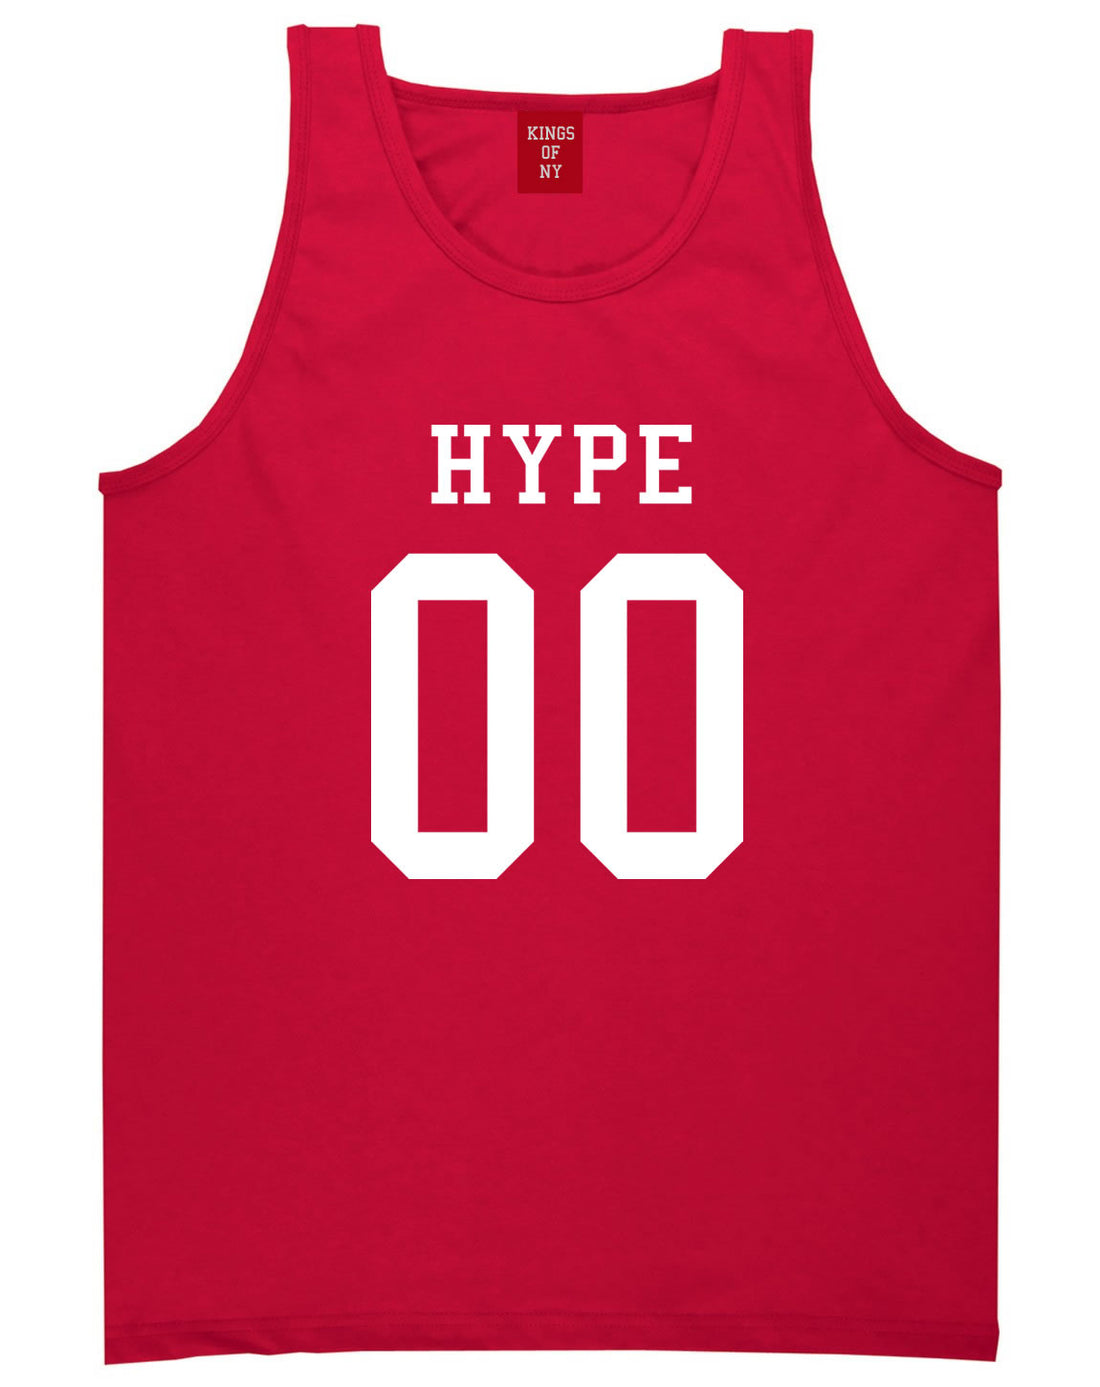 Hype Team Jersey Tank Top in Red By Kings Of NY